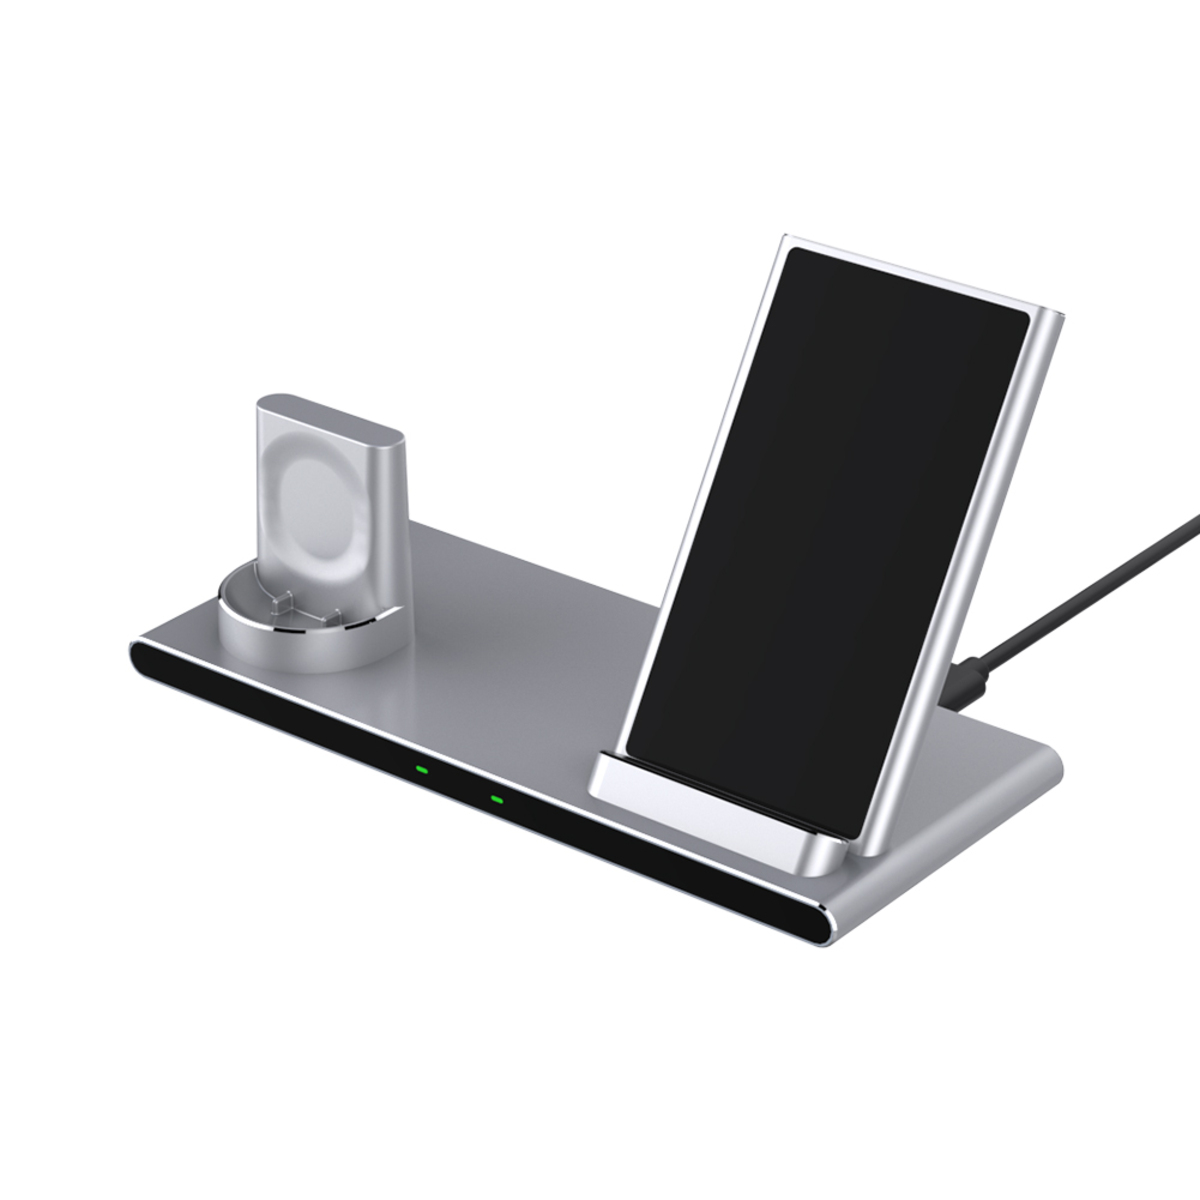 yootech-wireless-charger-stand-review-broad-compatibility